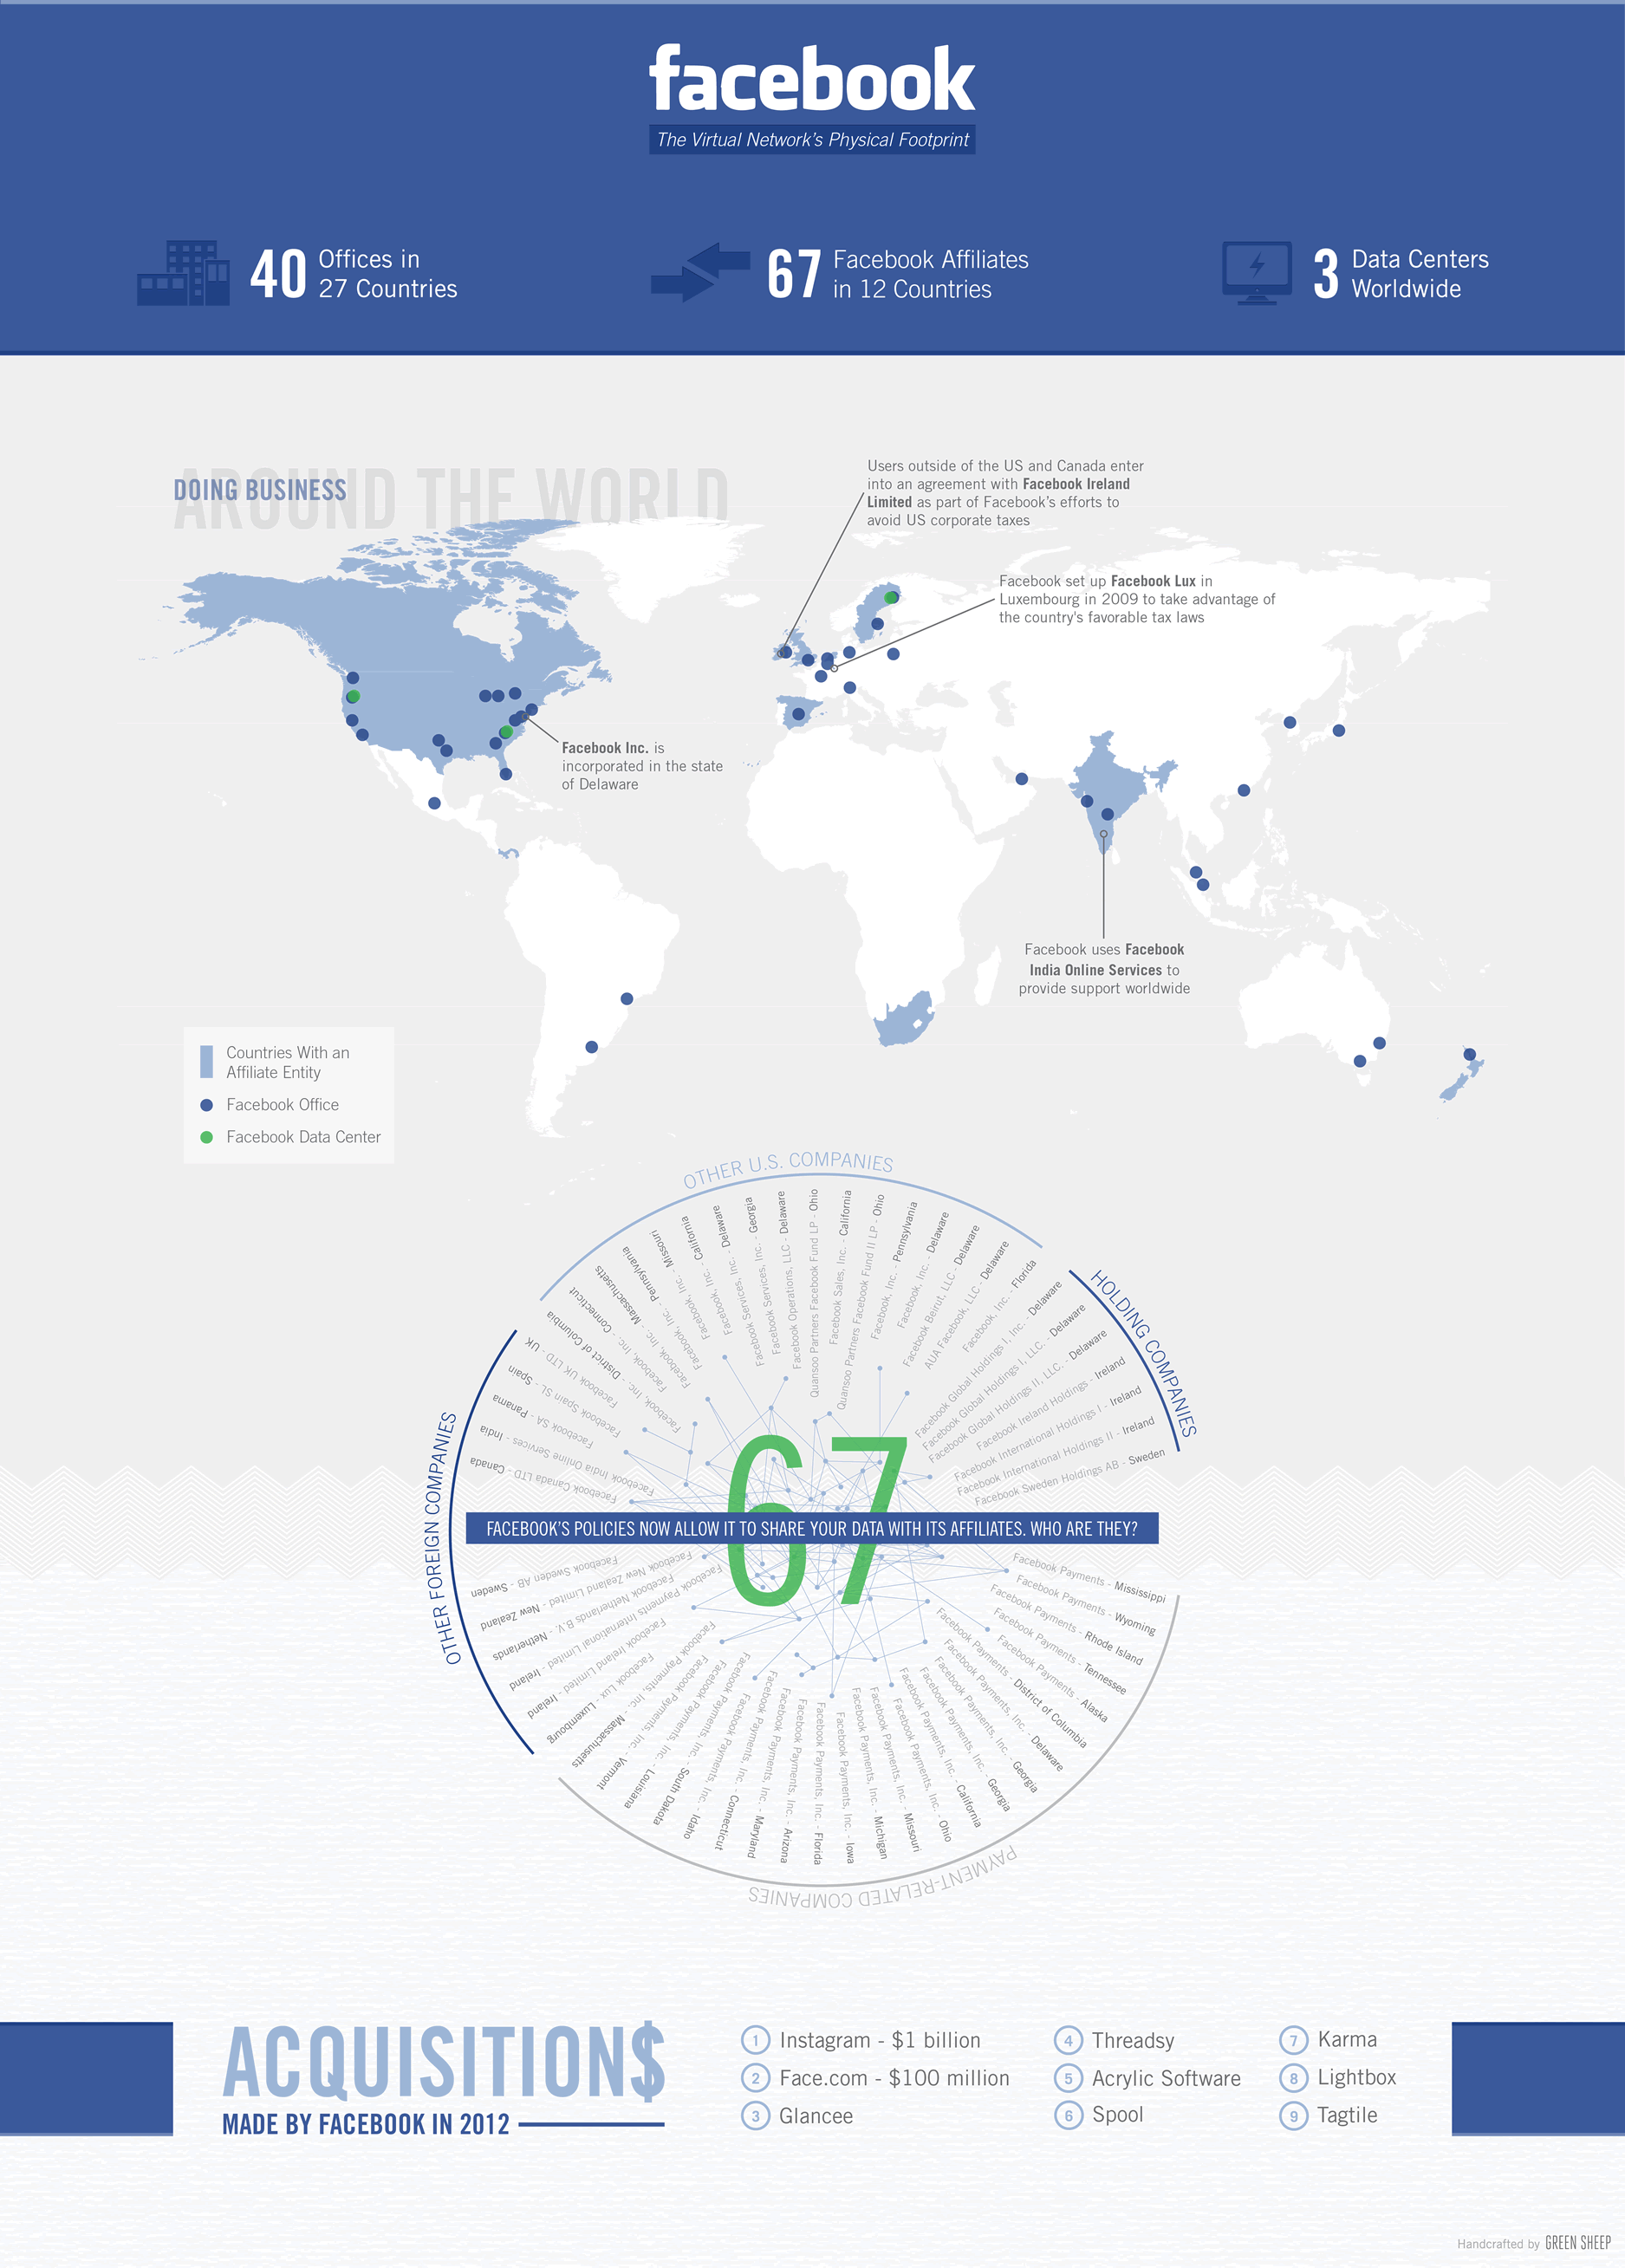 Facebook's Worldwide Affiliate Network Infographic